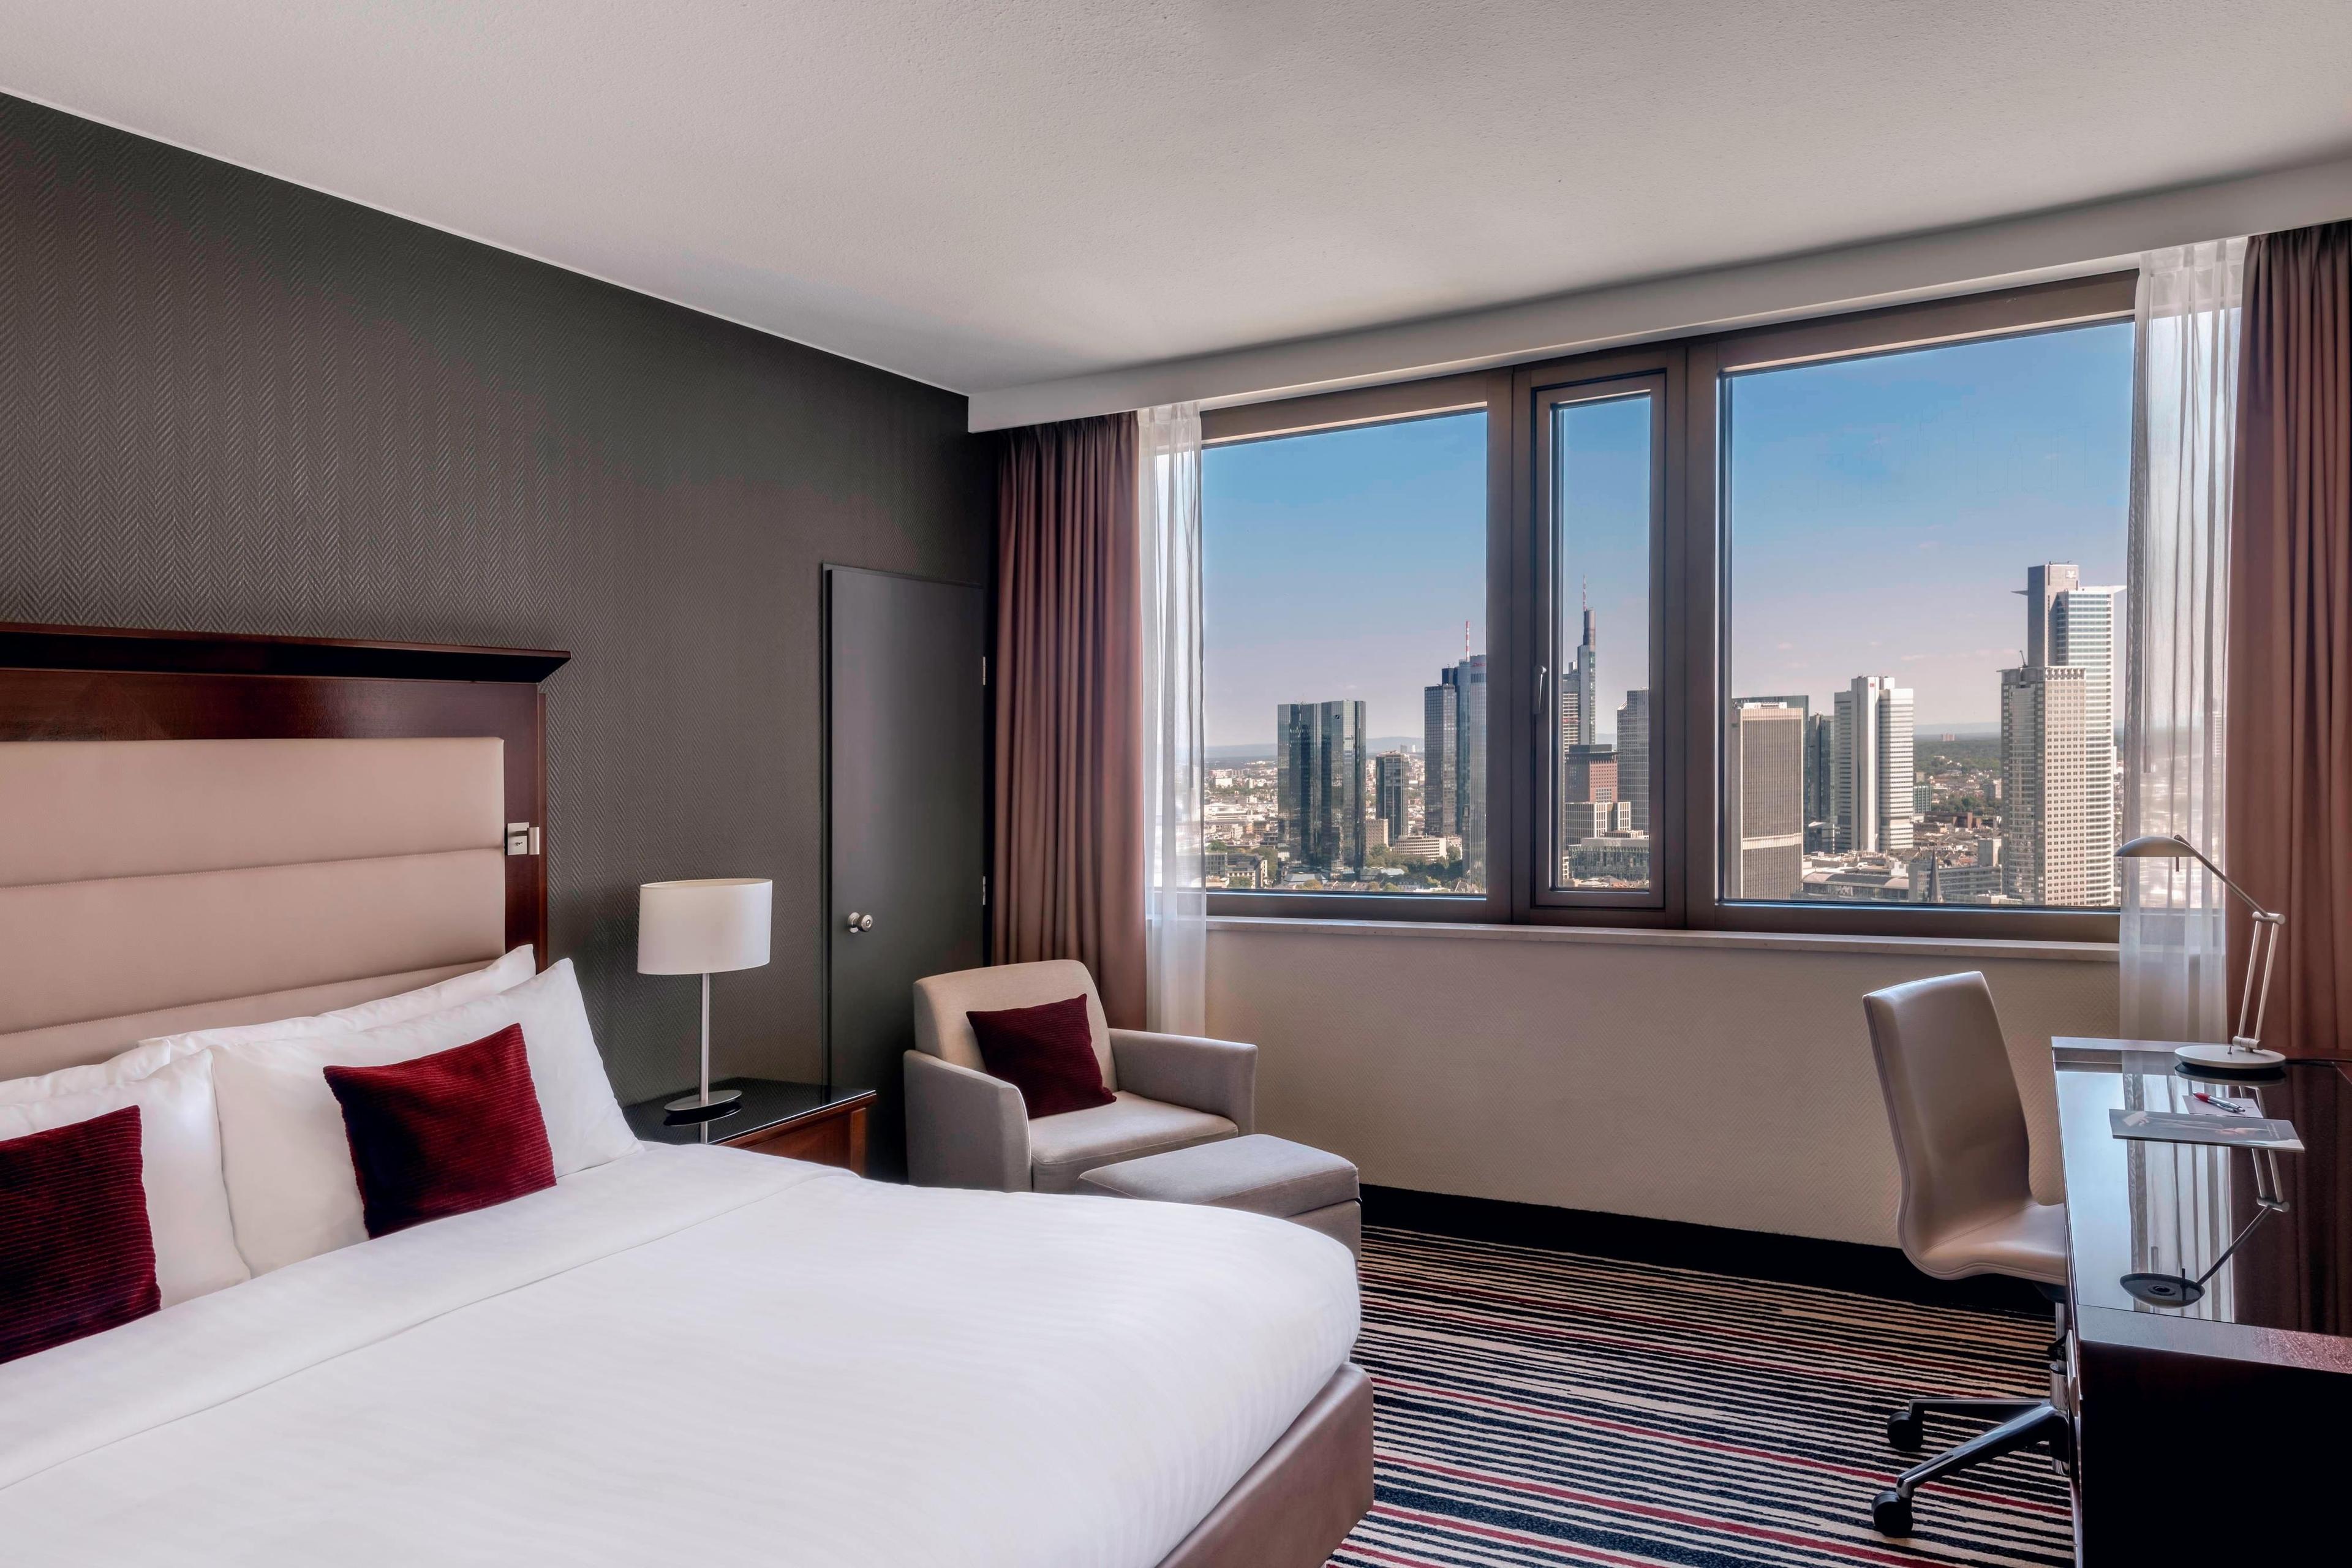 Skyline view rooms showcase the city's splendor. Each room includes complimentary breakfast and free Wi-Fi.